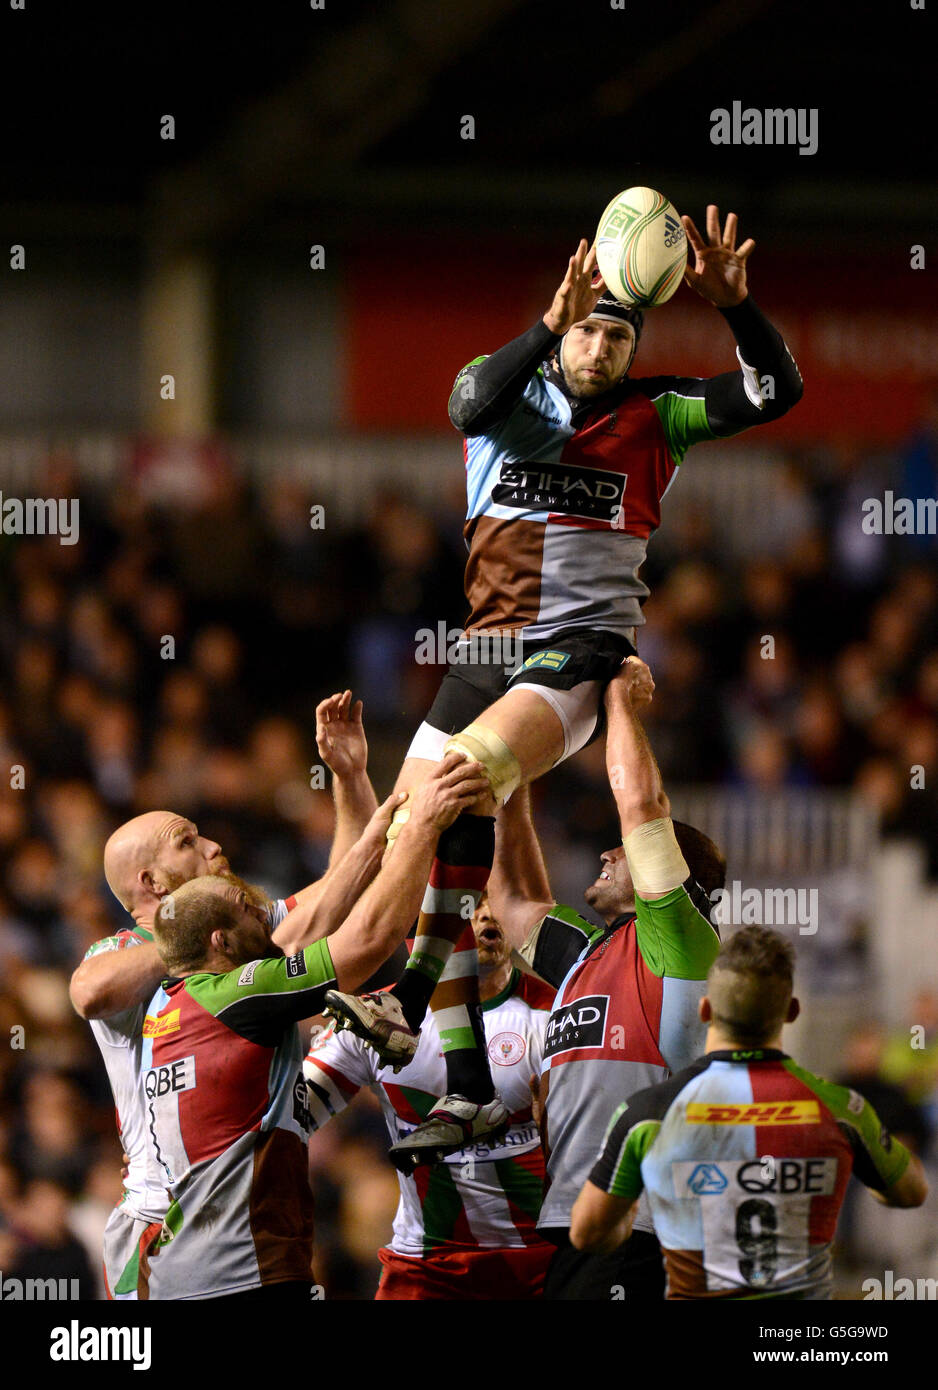 Rugby Union - Heineken Cup - Pool 3 - Harlequins v Biarritz Olympique Pays Basque - Twickenham Stoop. Harlequins' George Robson reaches for the ball in a line out throw Stock Photo